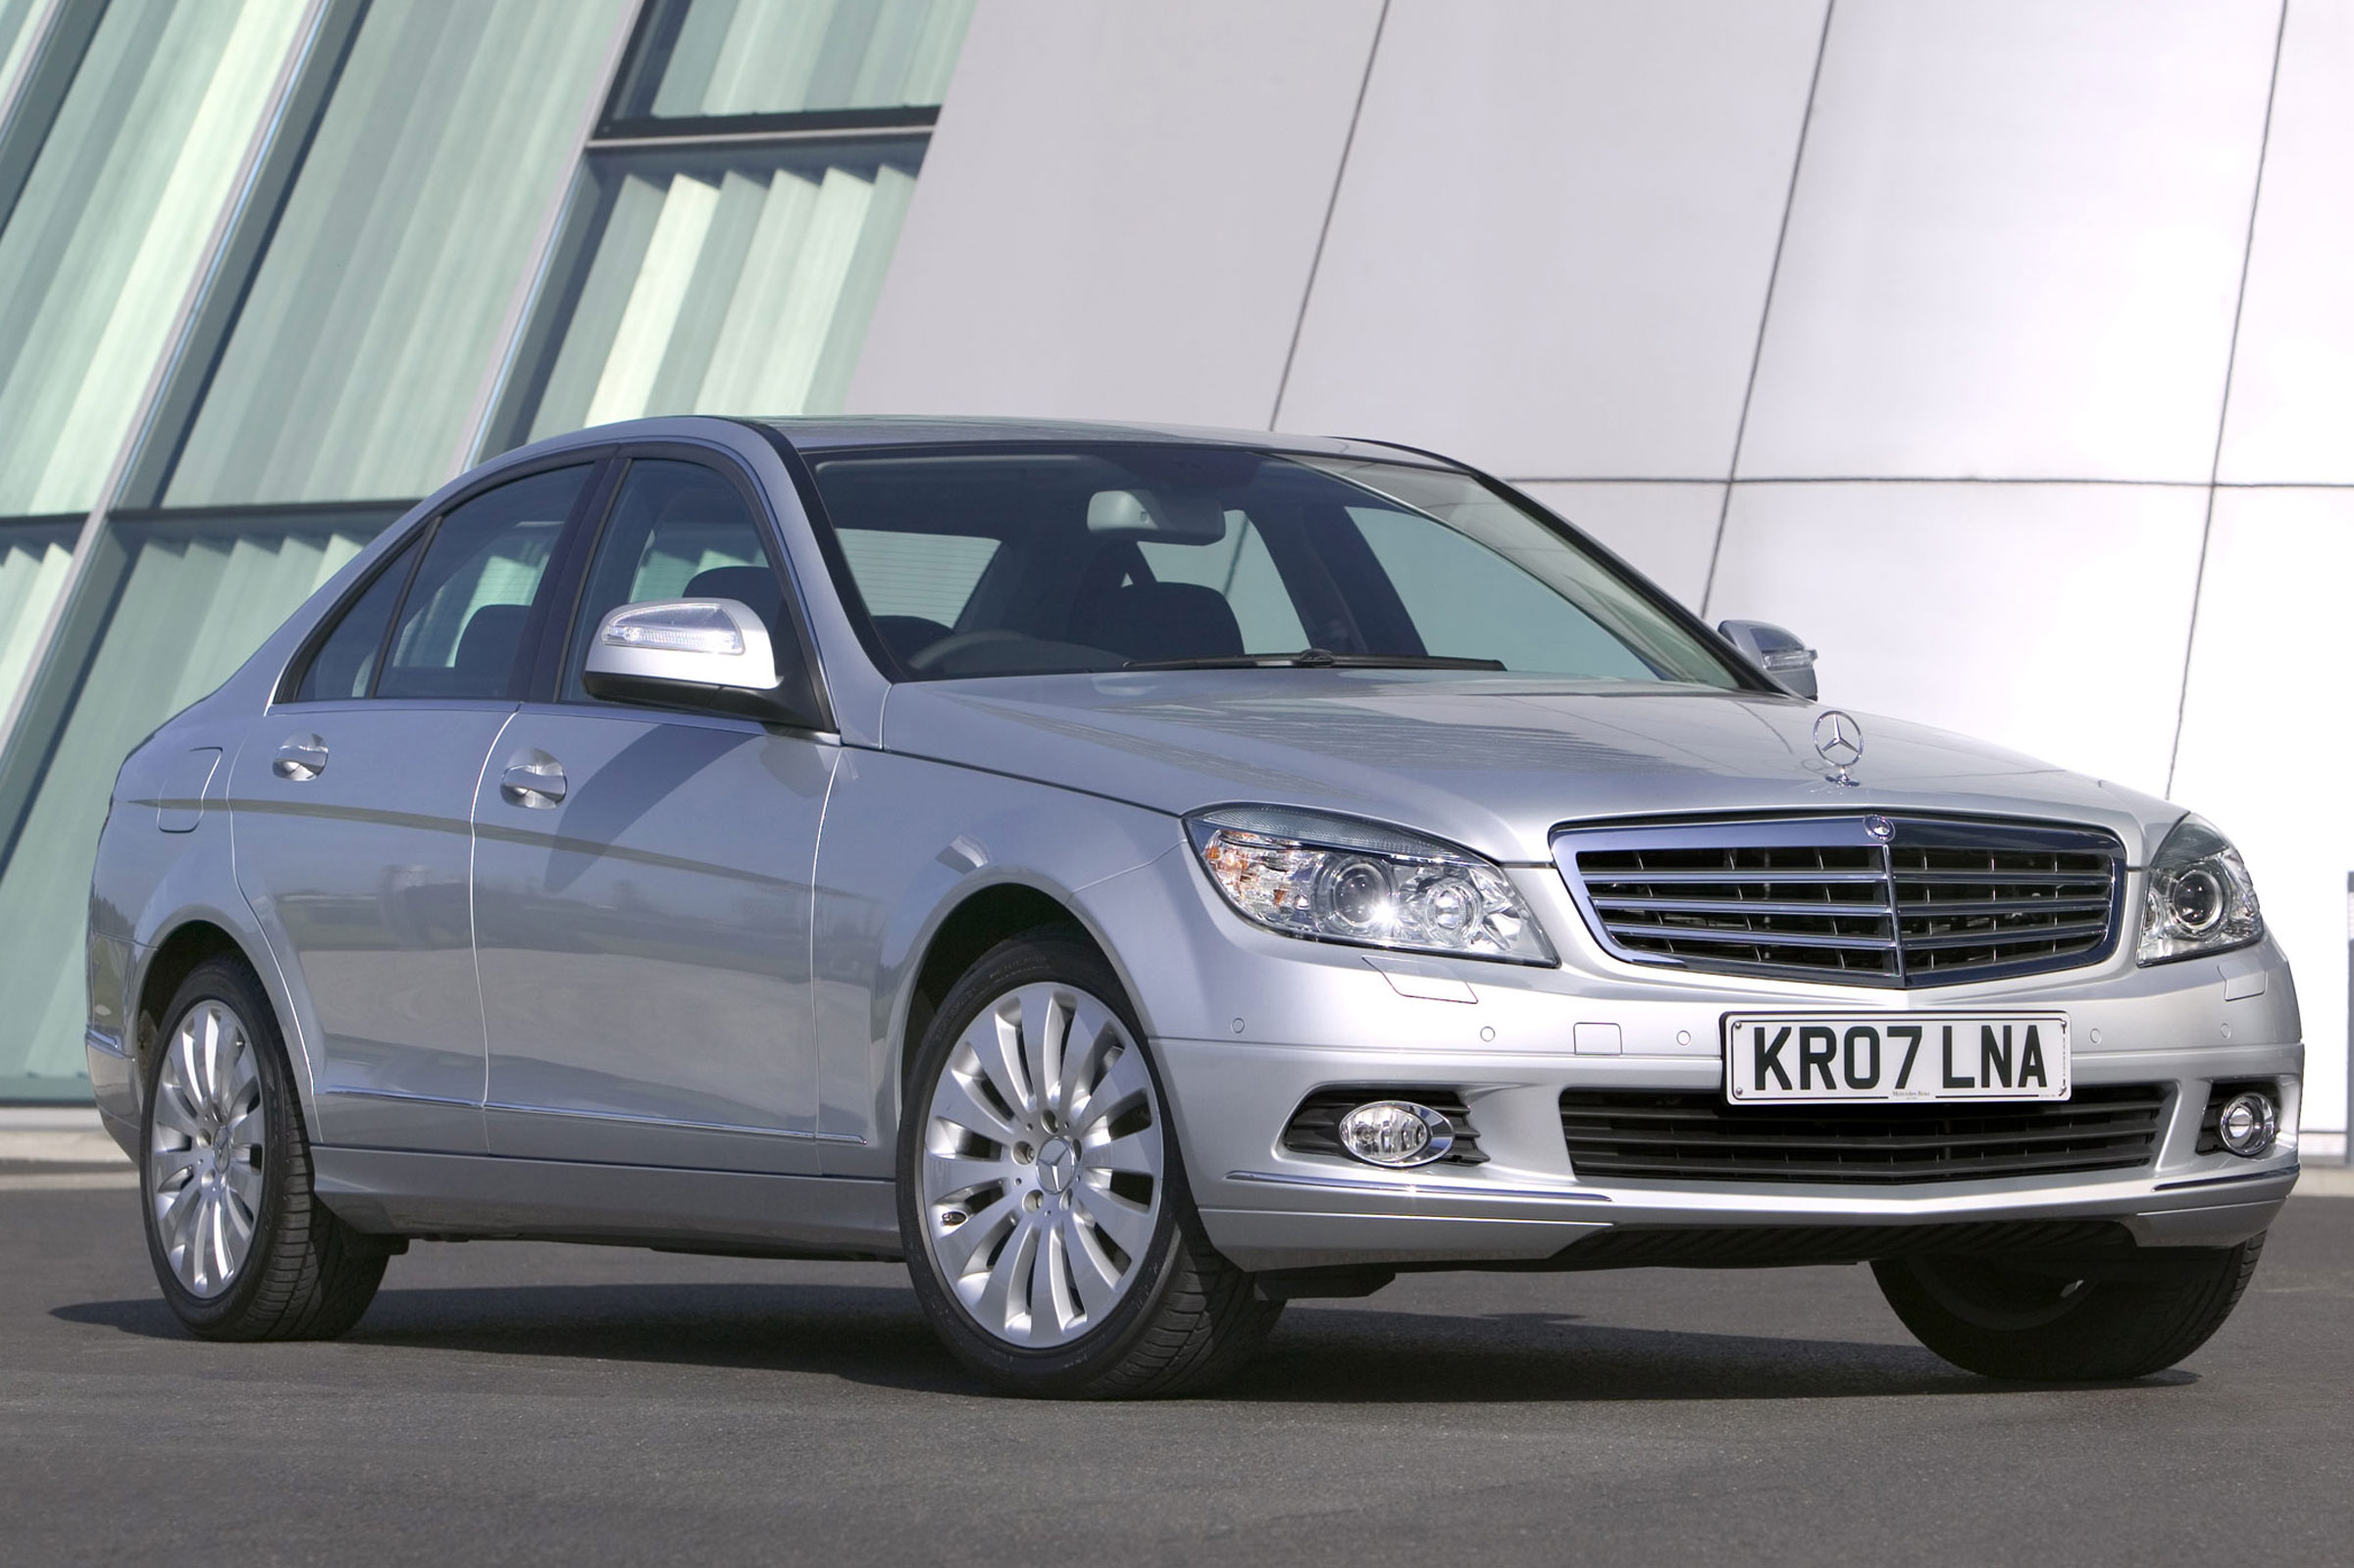 Used Mercedes-Benz C-Class Saloon (2007 - 2014) Review